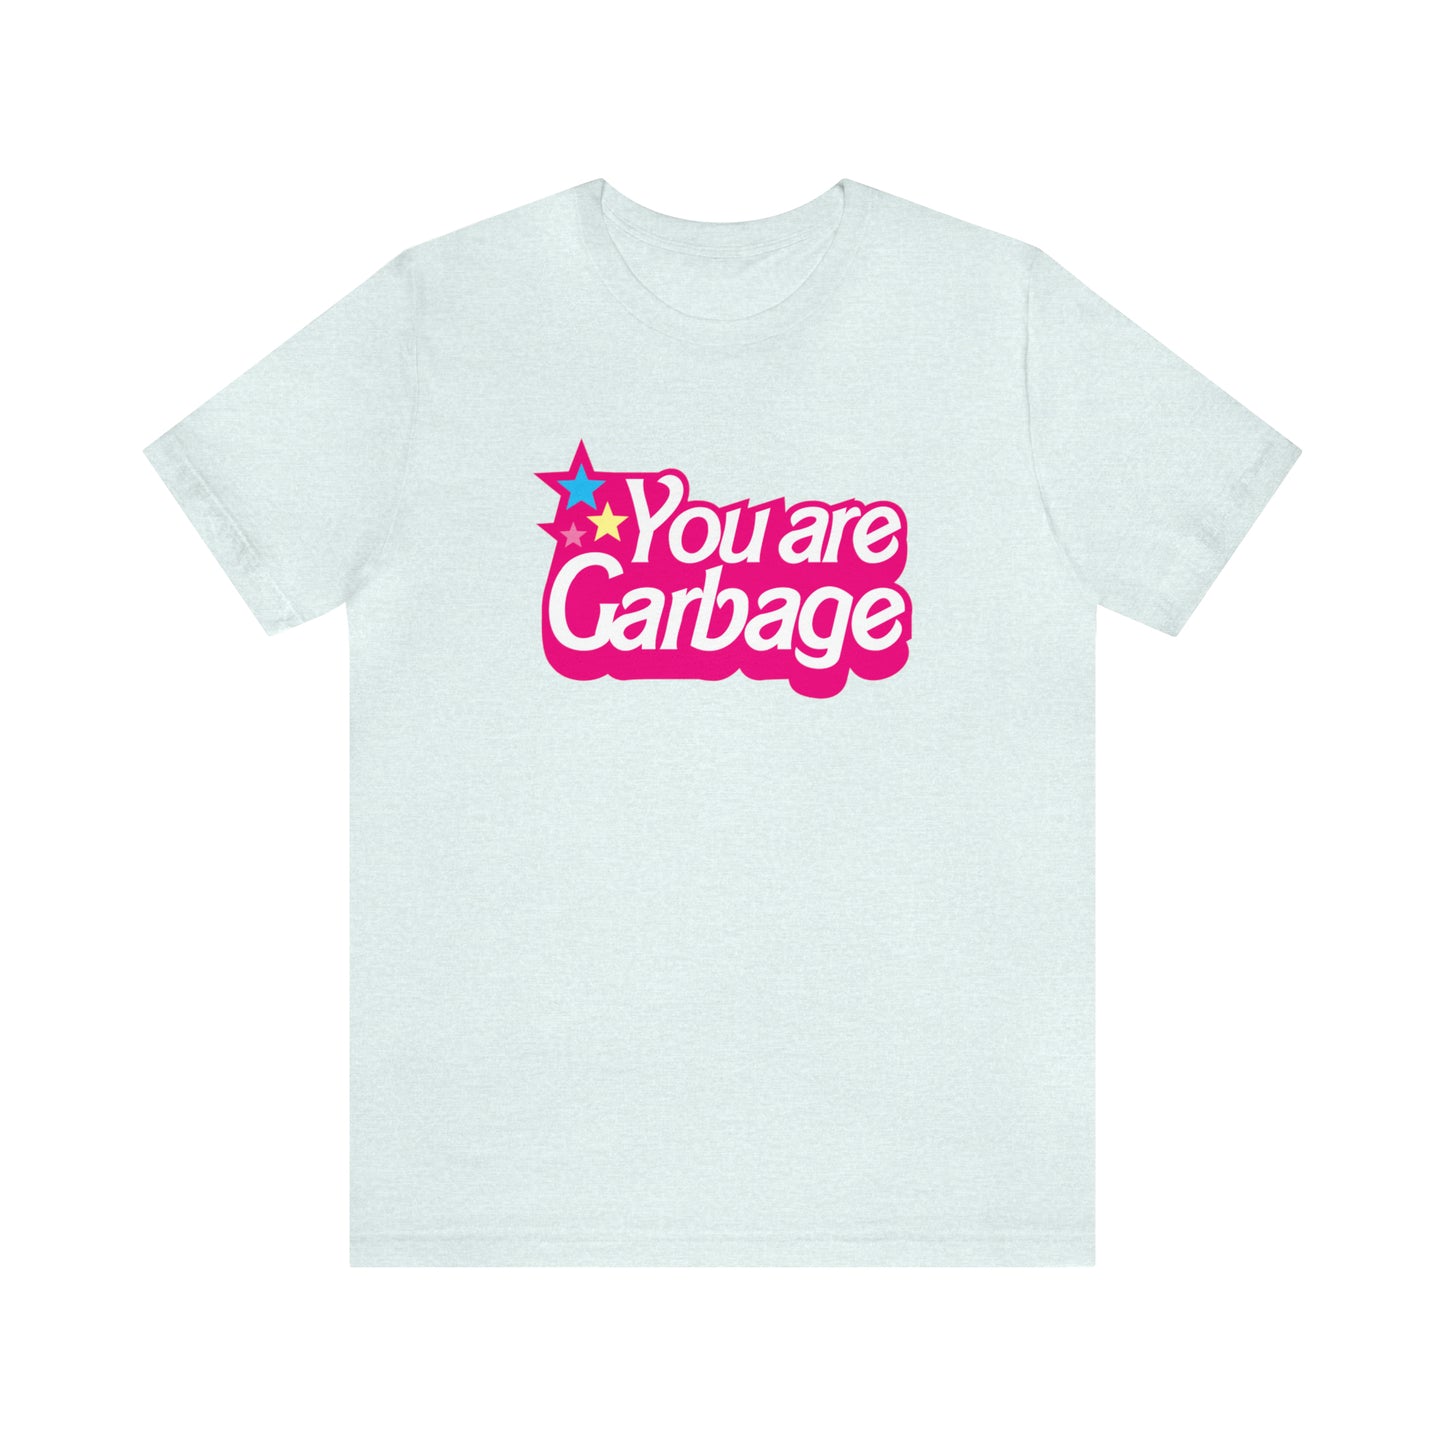 You Are Garbage T-Shirt